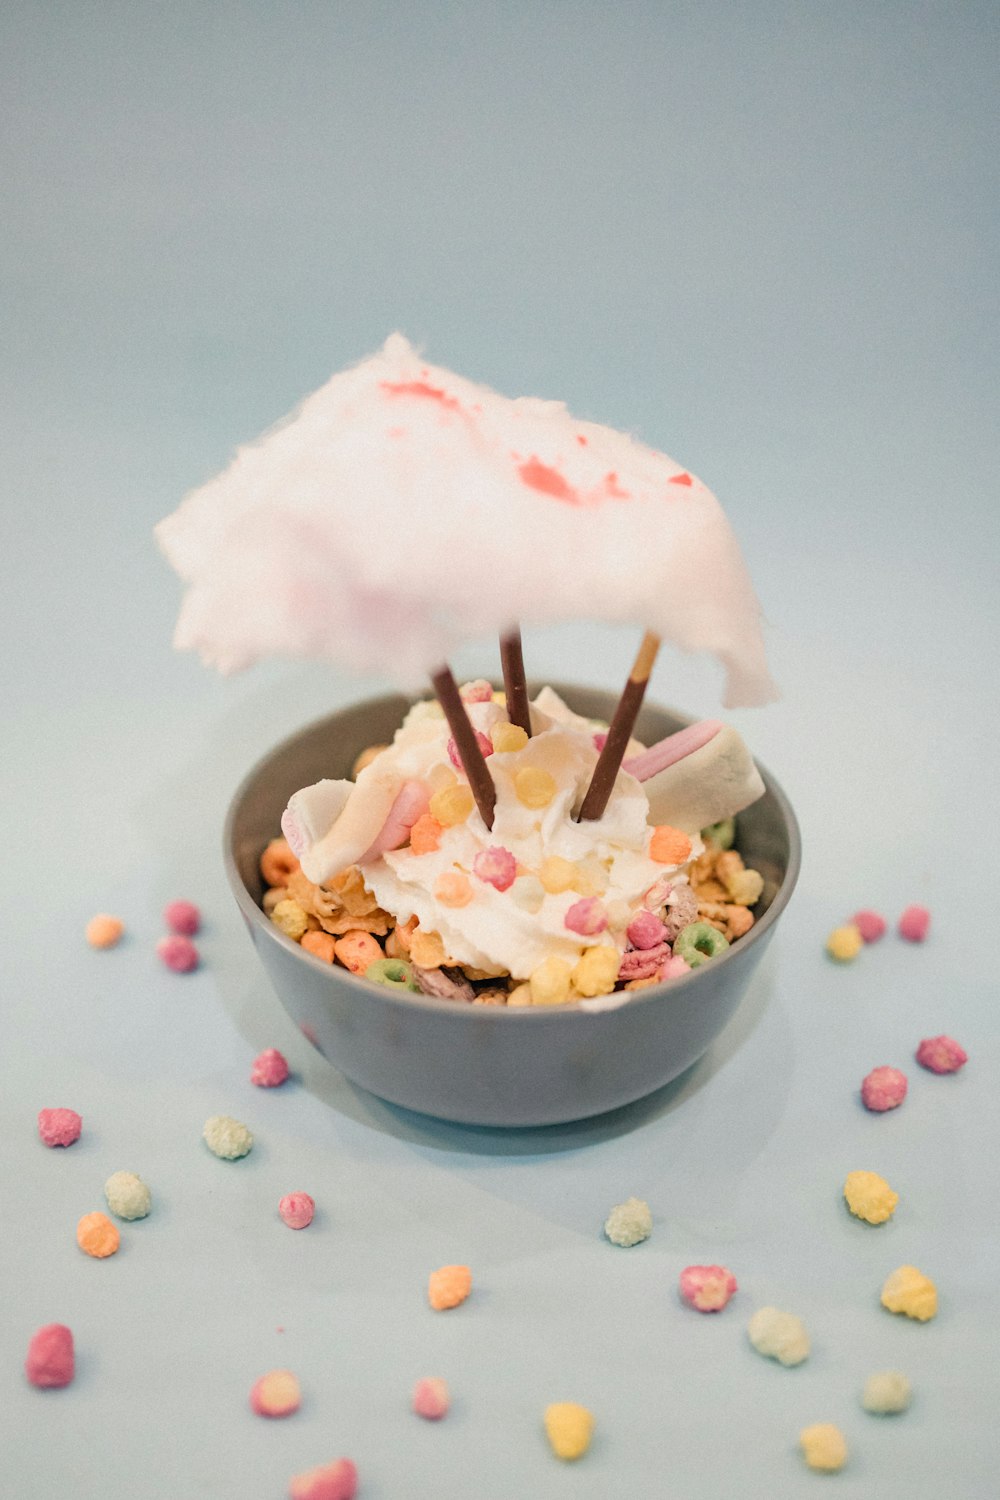 a bowl of cereal with marshmallows and an umbrella